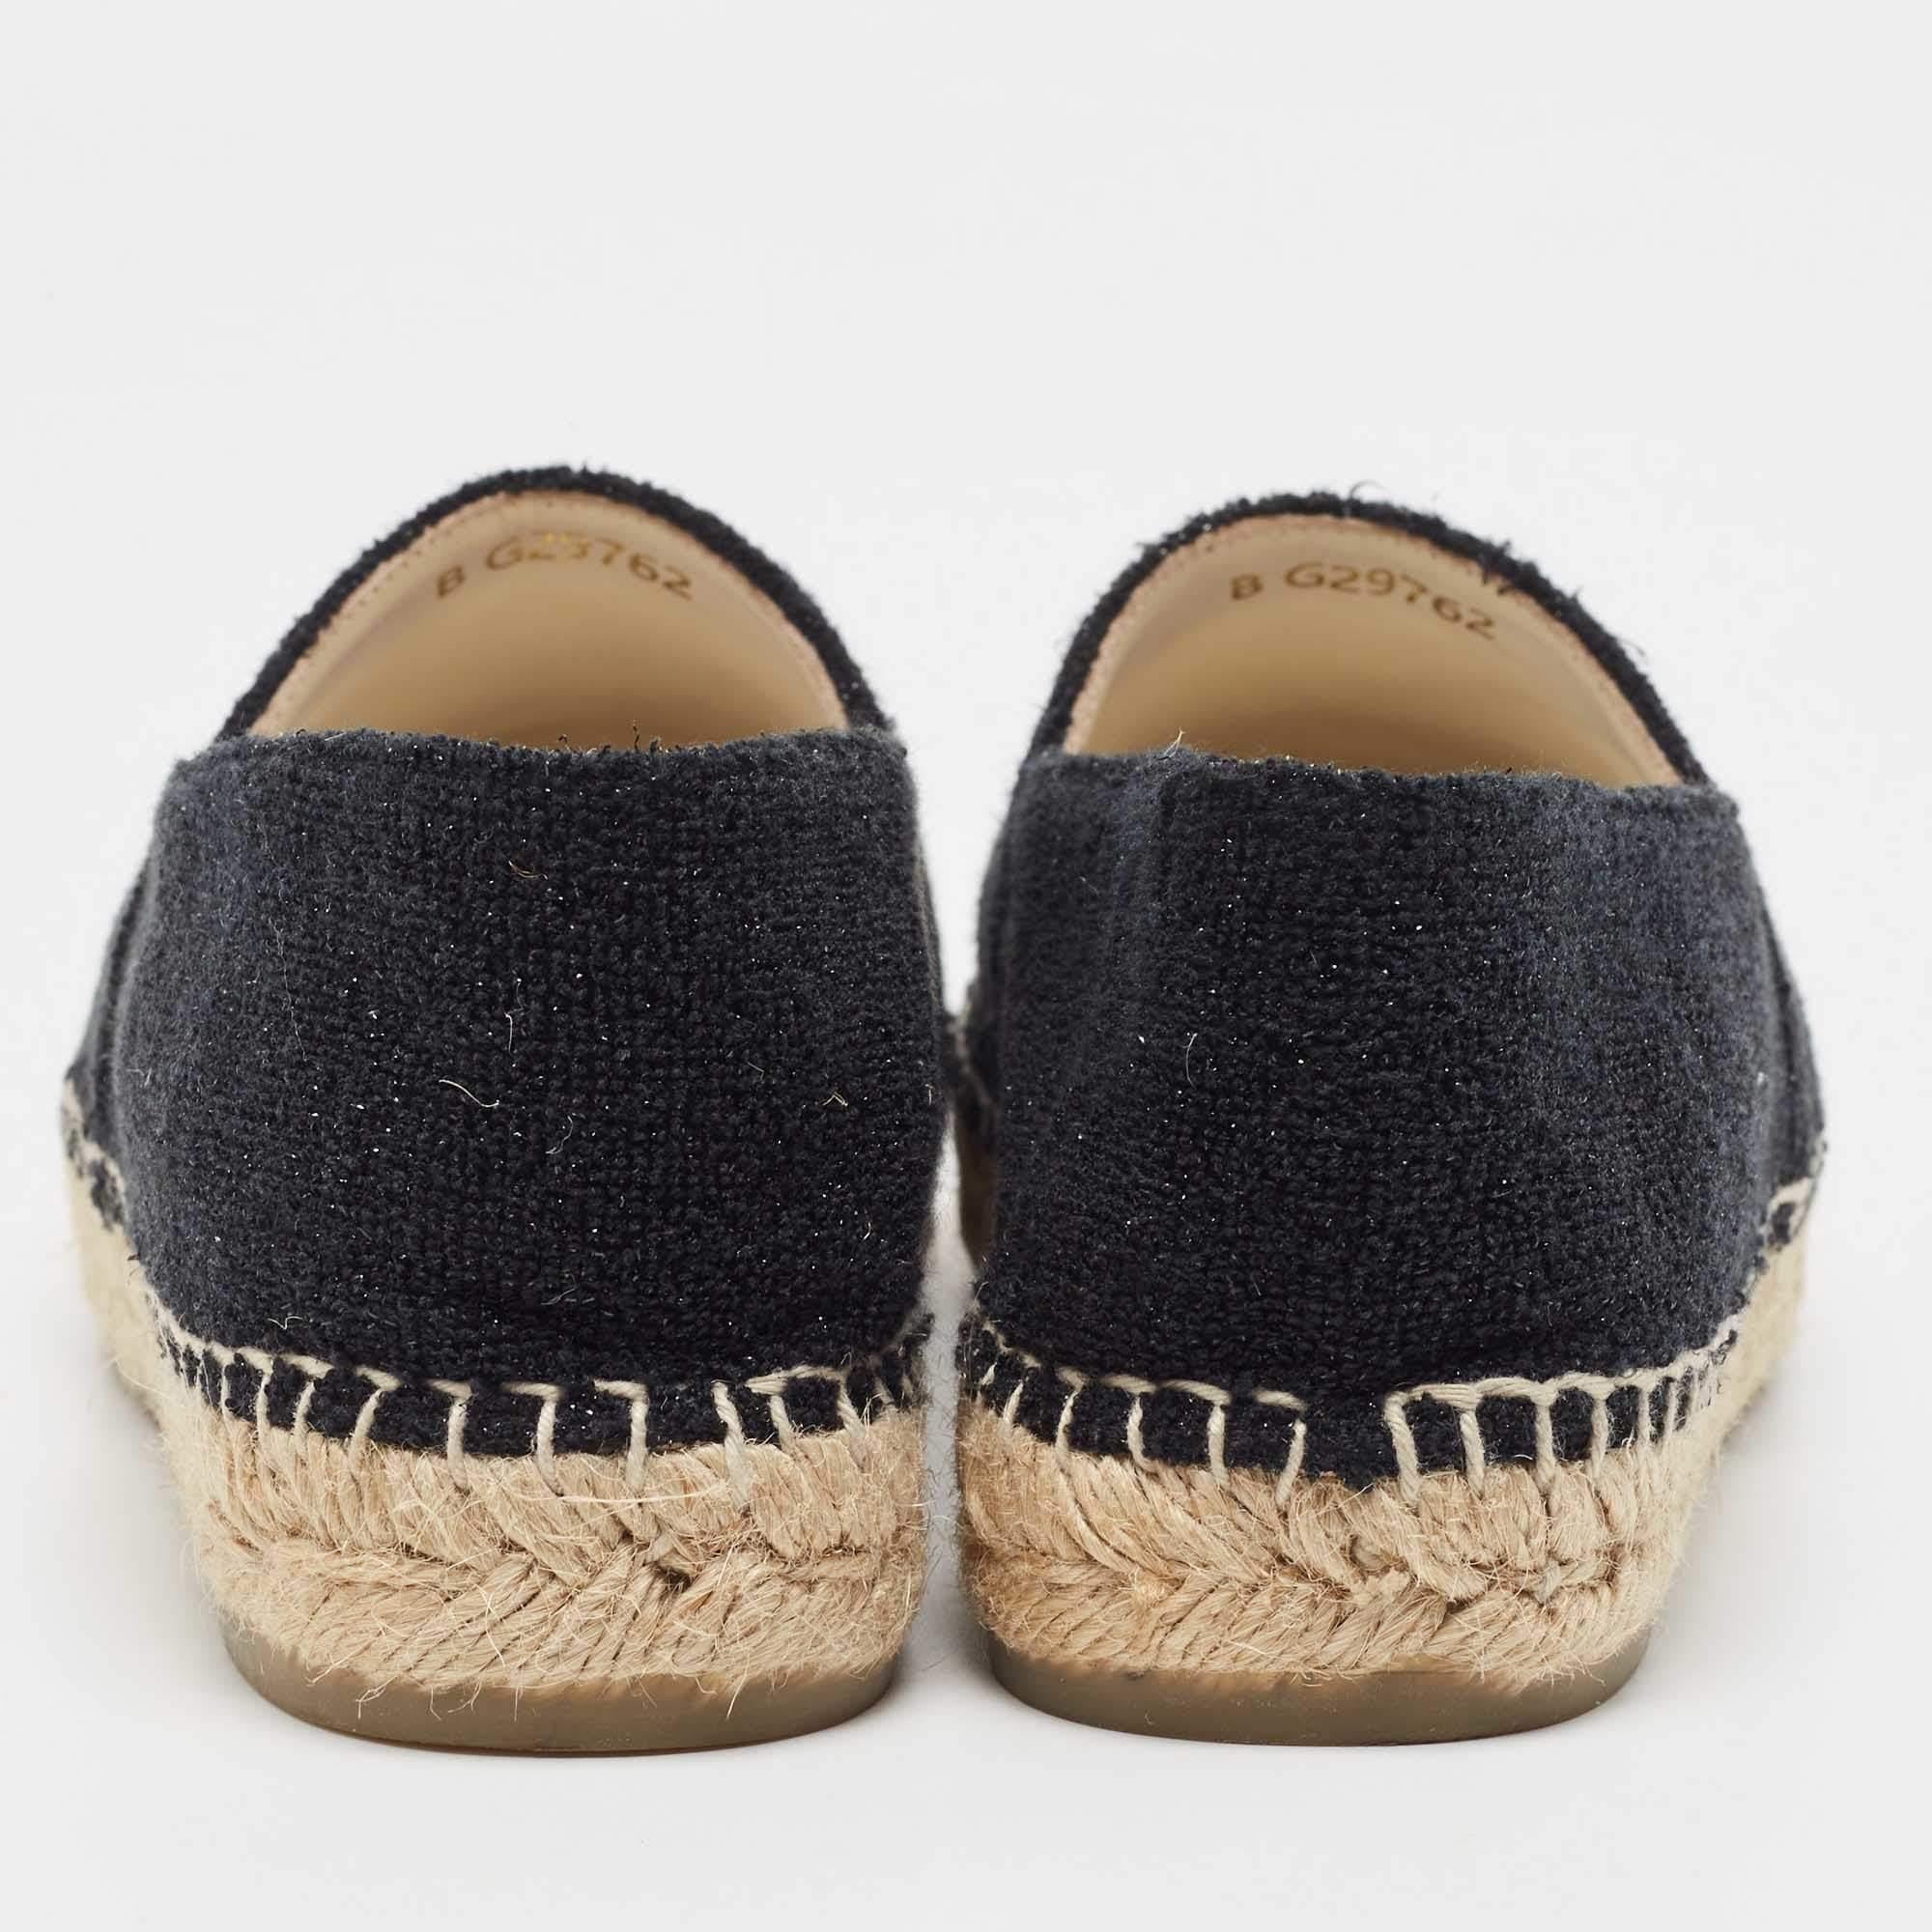 Chanel Black Tweed and Patent CC Espadrille Flats Size 39 1